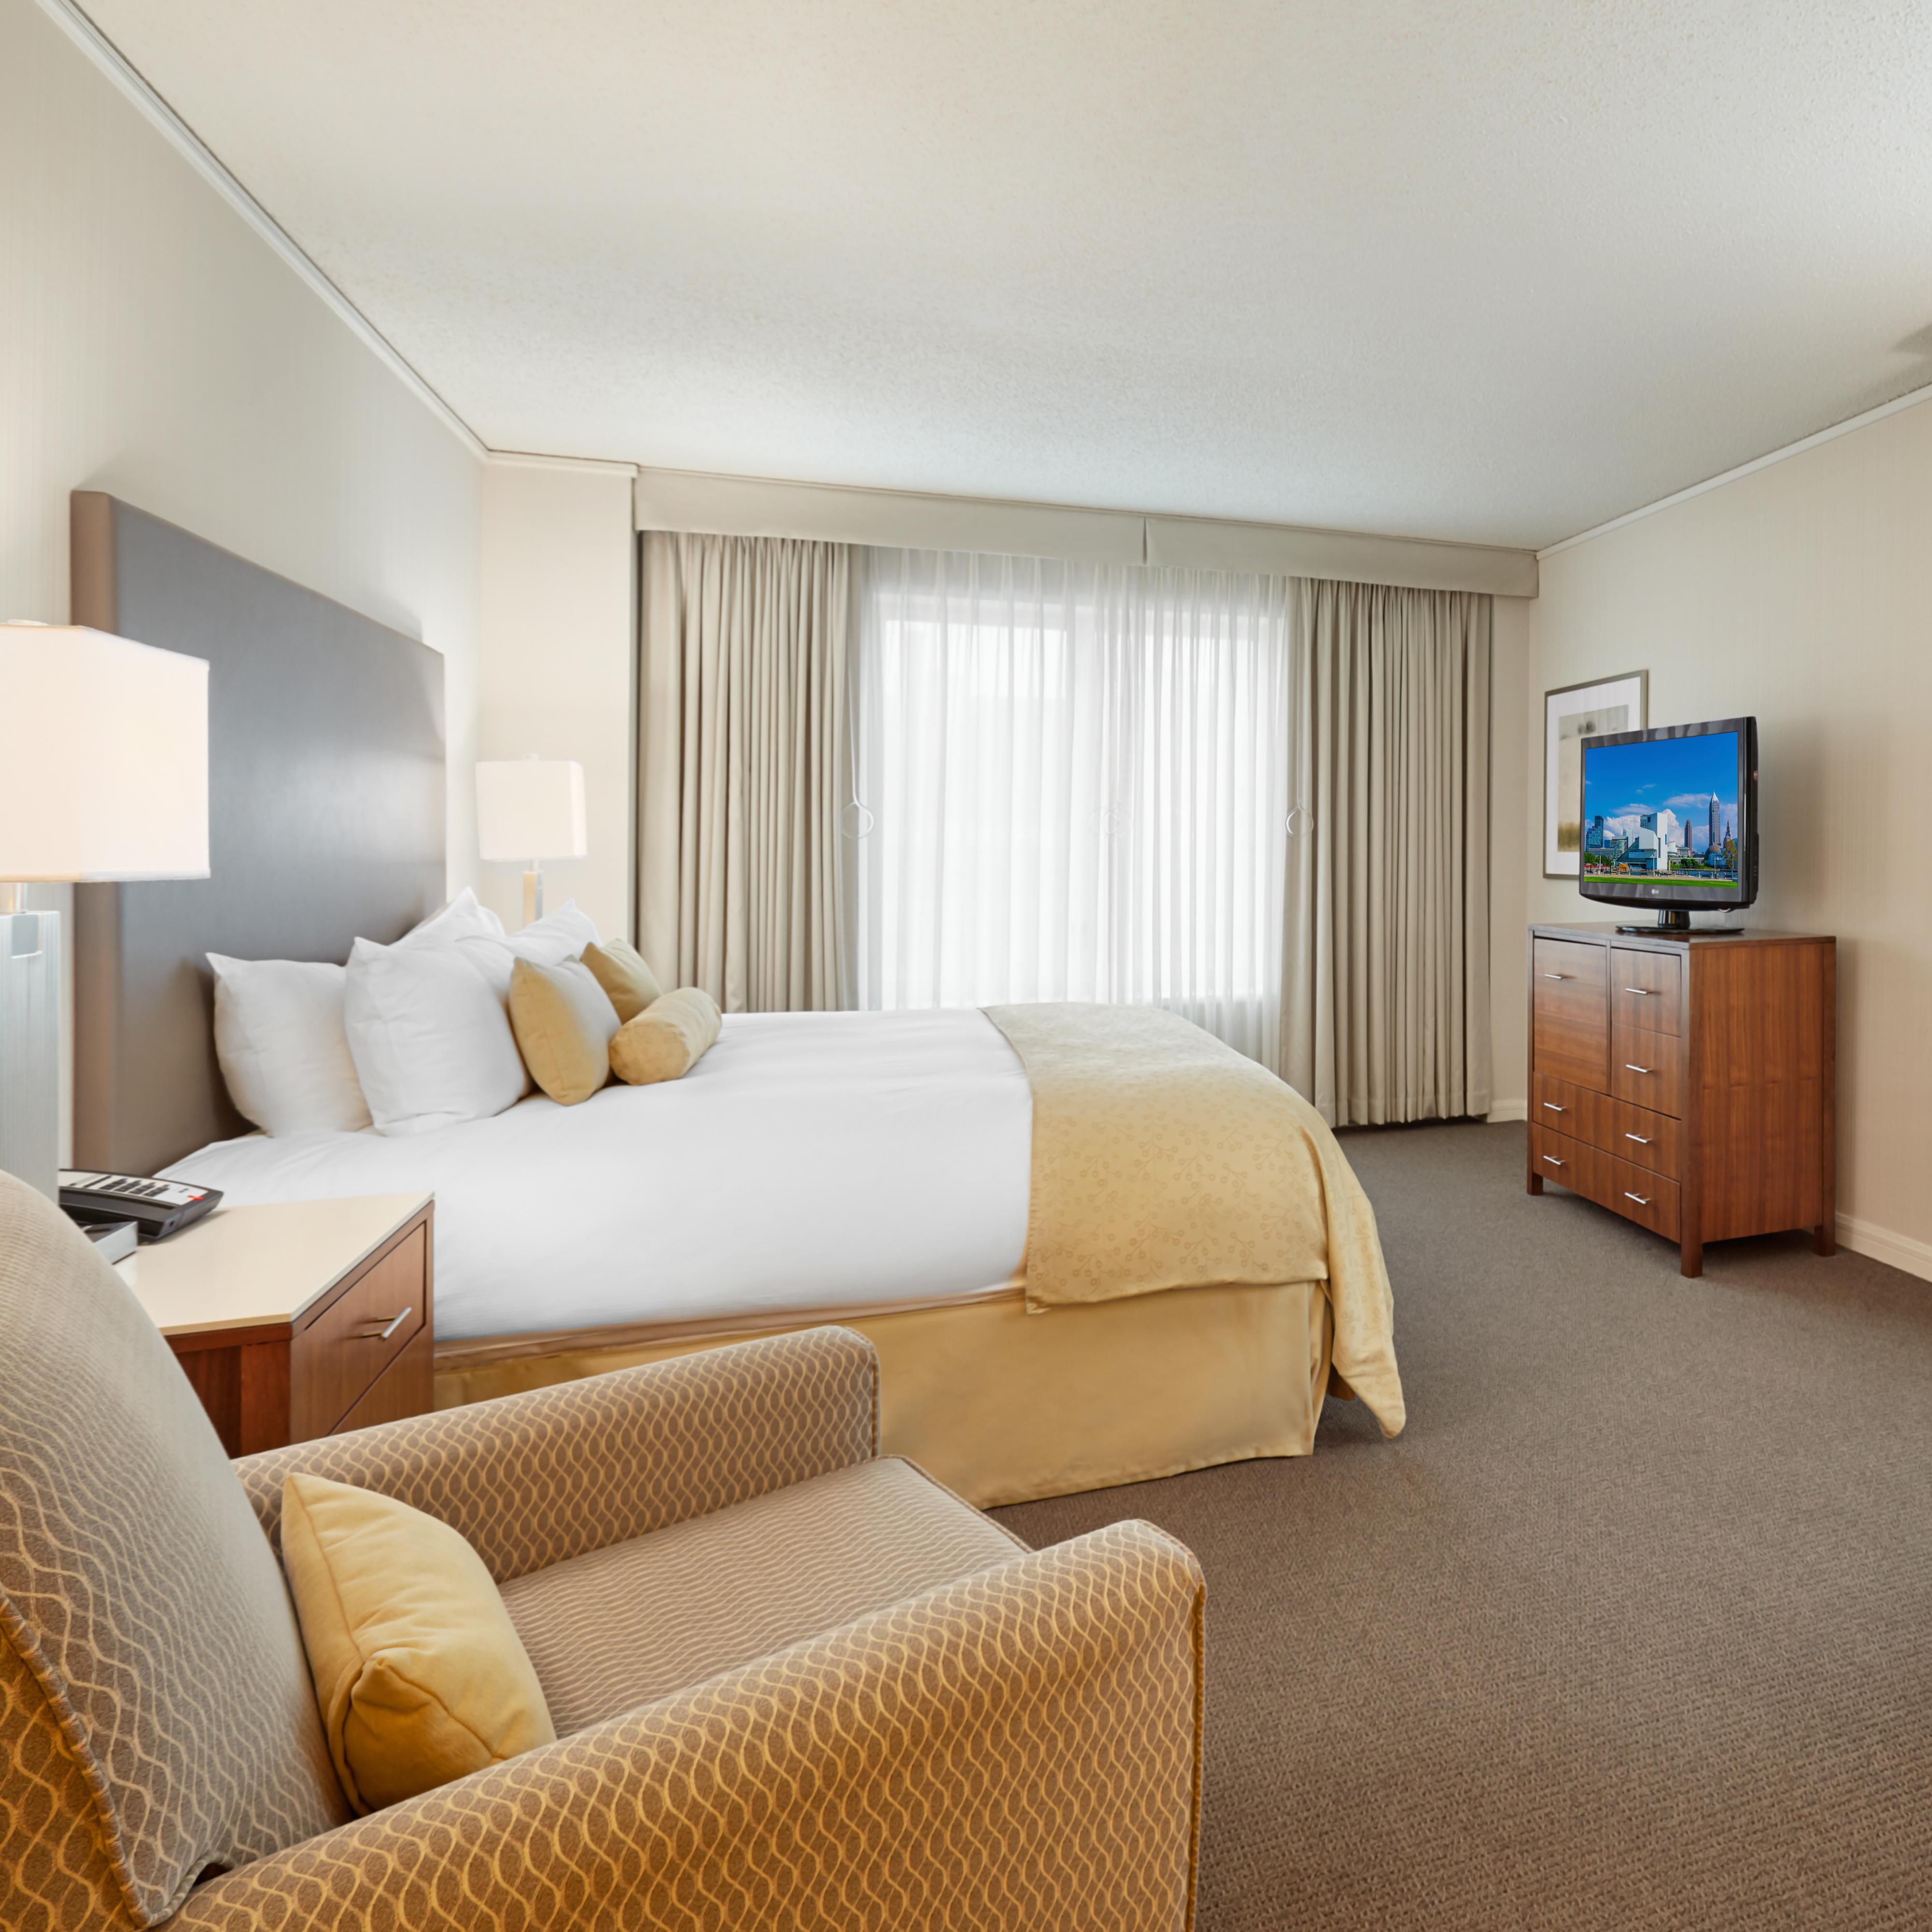 Luxury Suites Hotel Near Cleveland Clinic Intercontinental